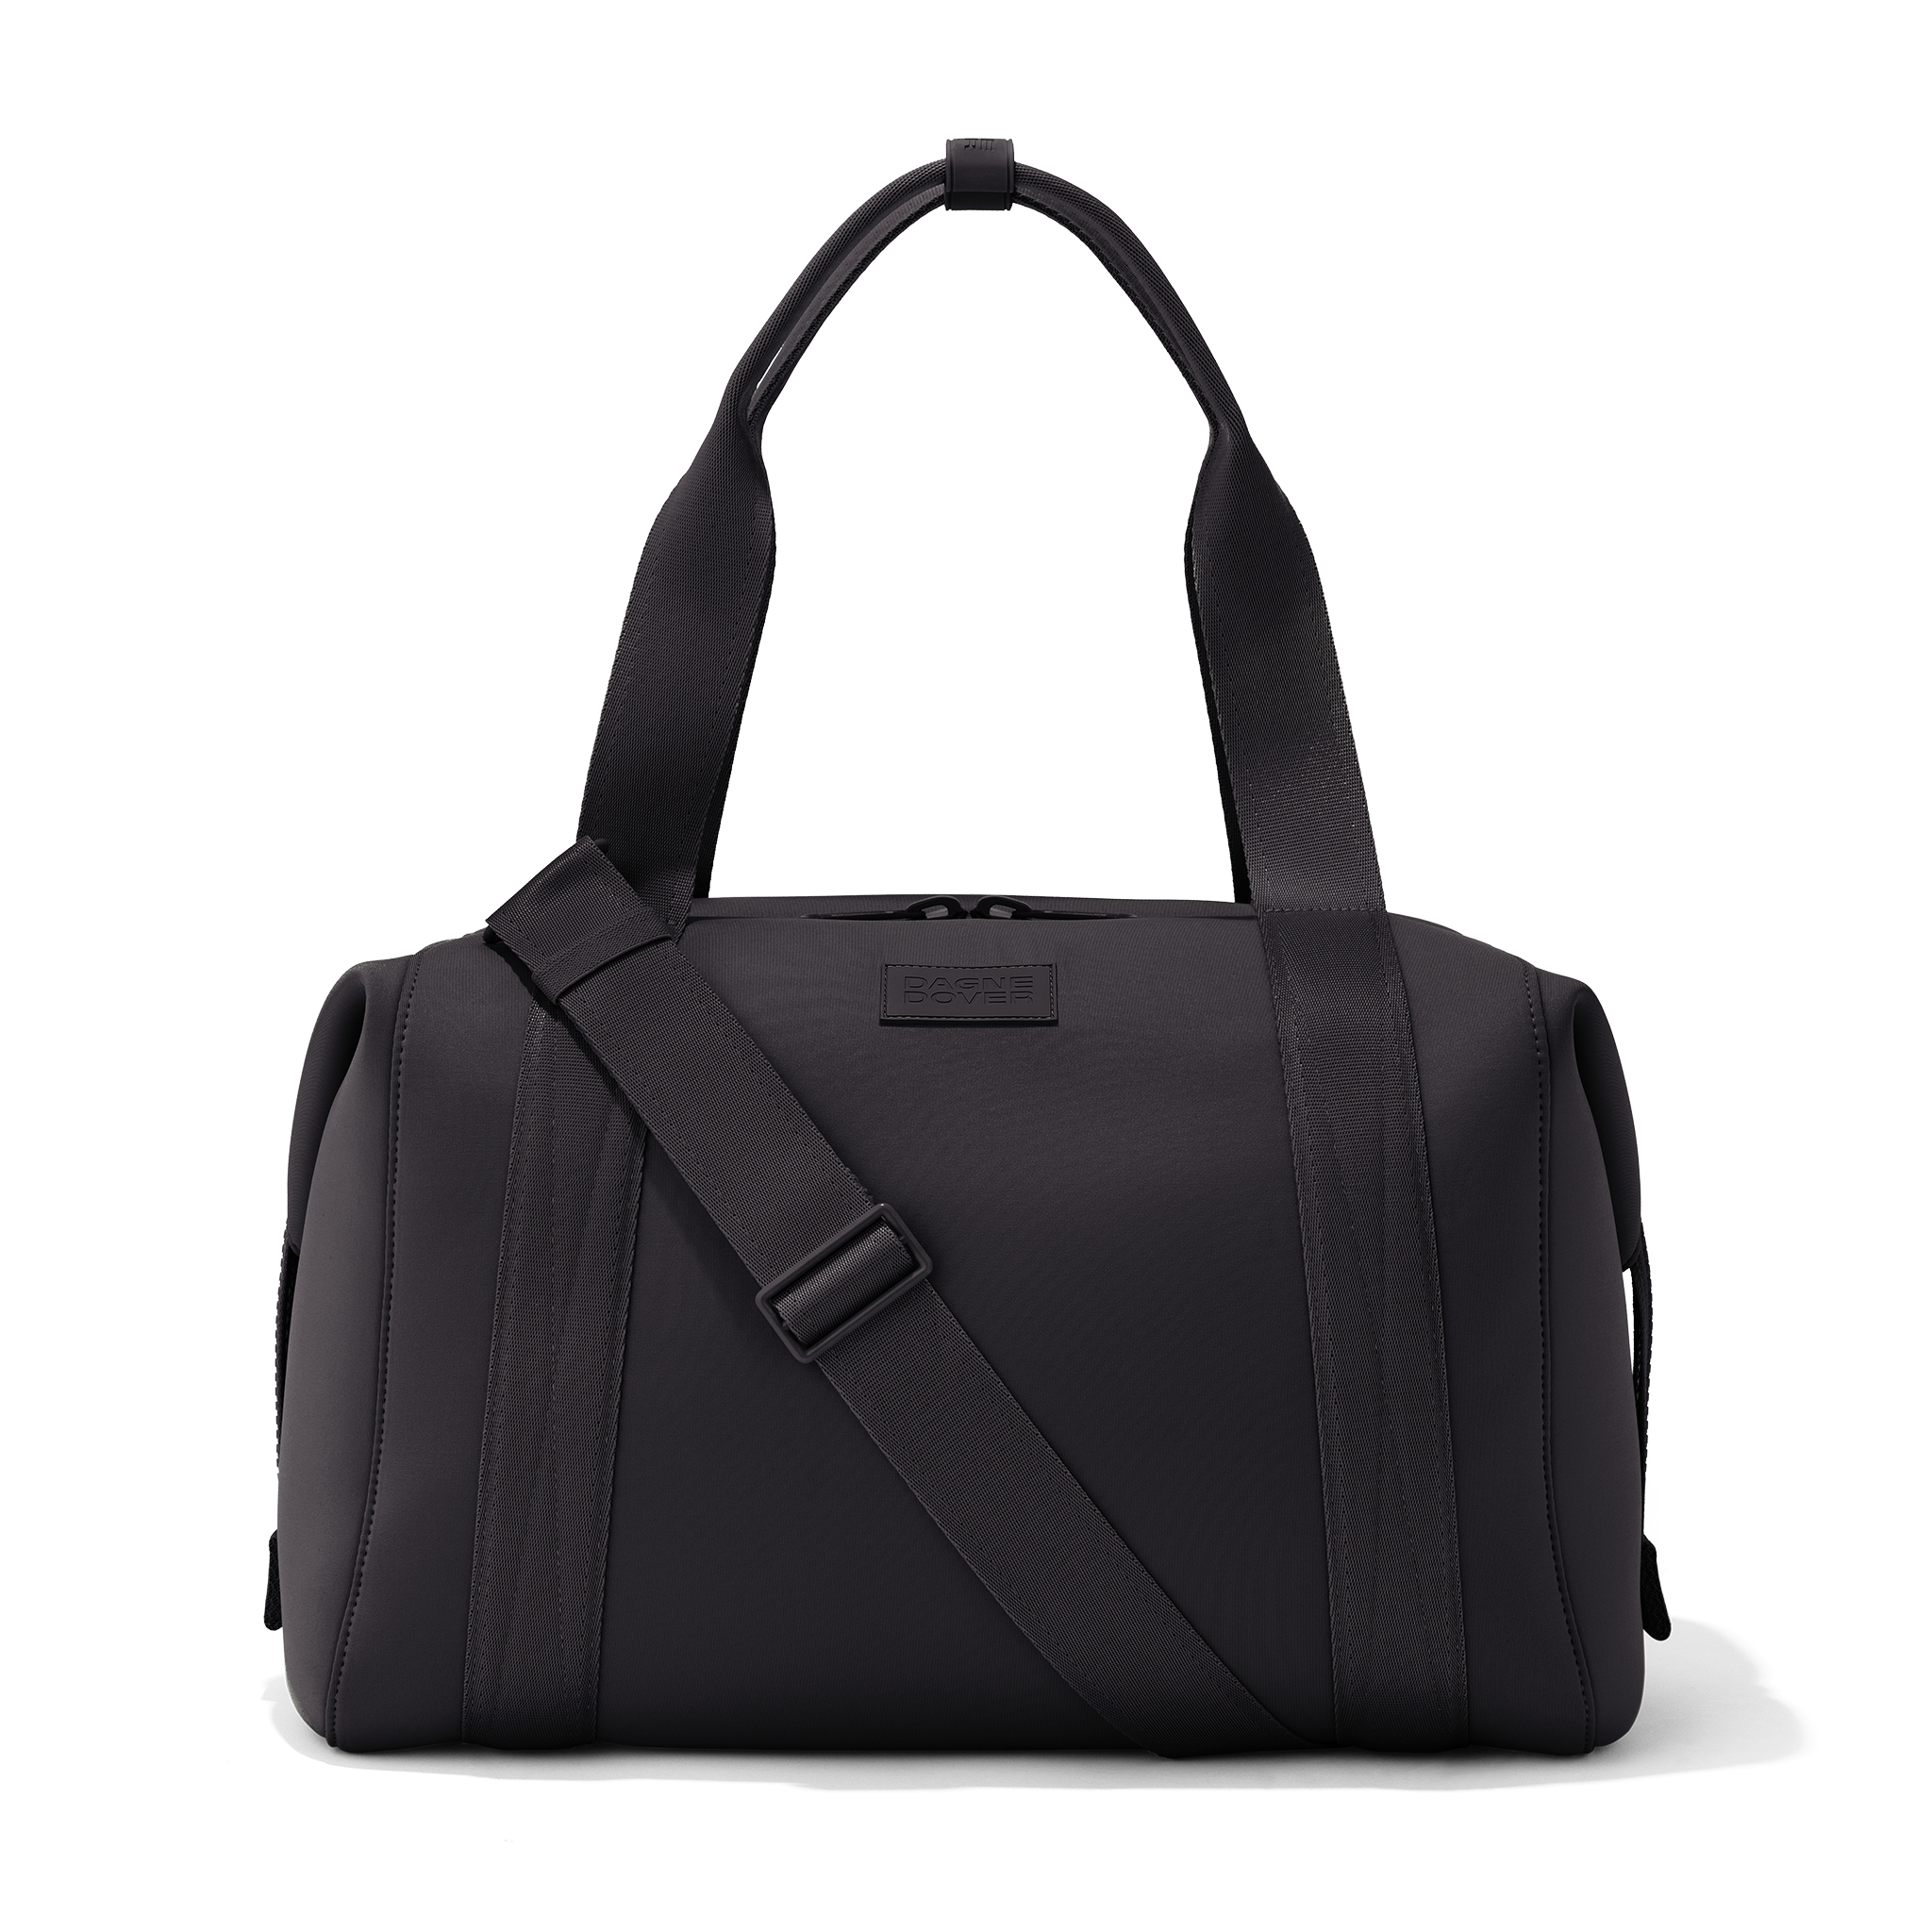 Landon Carryall in Onyx, Large